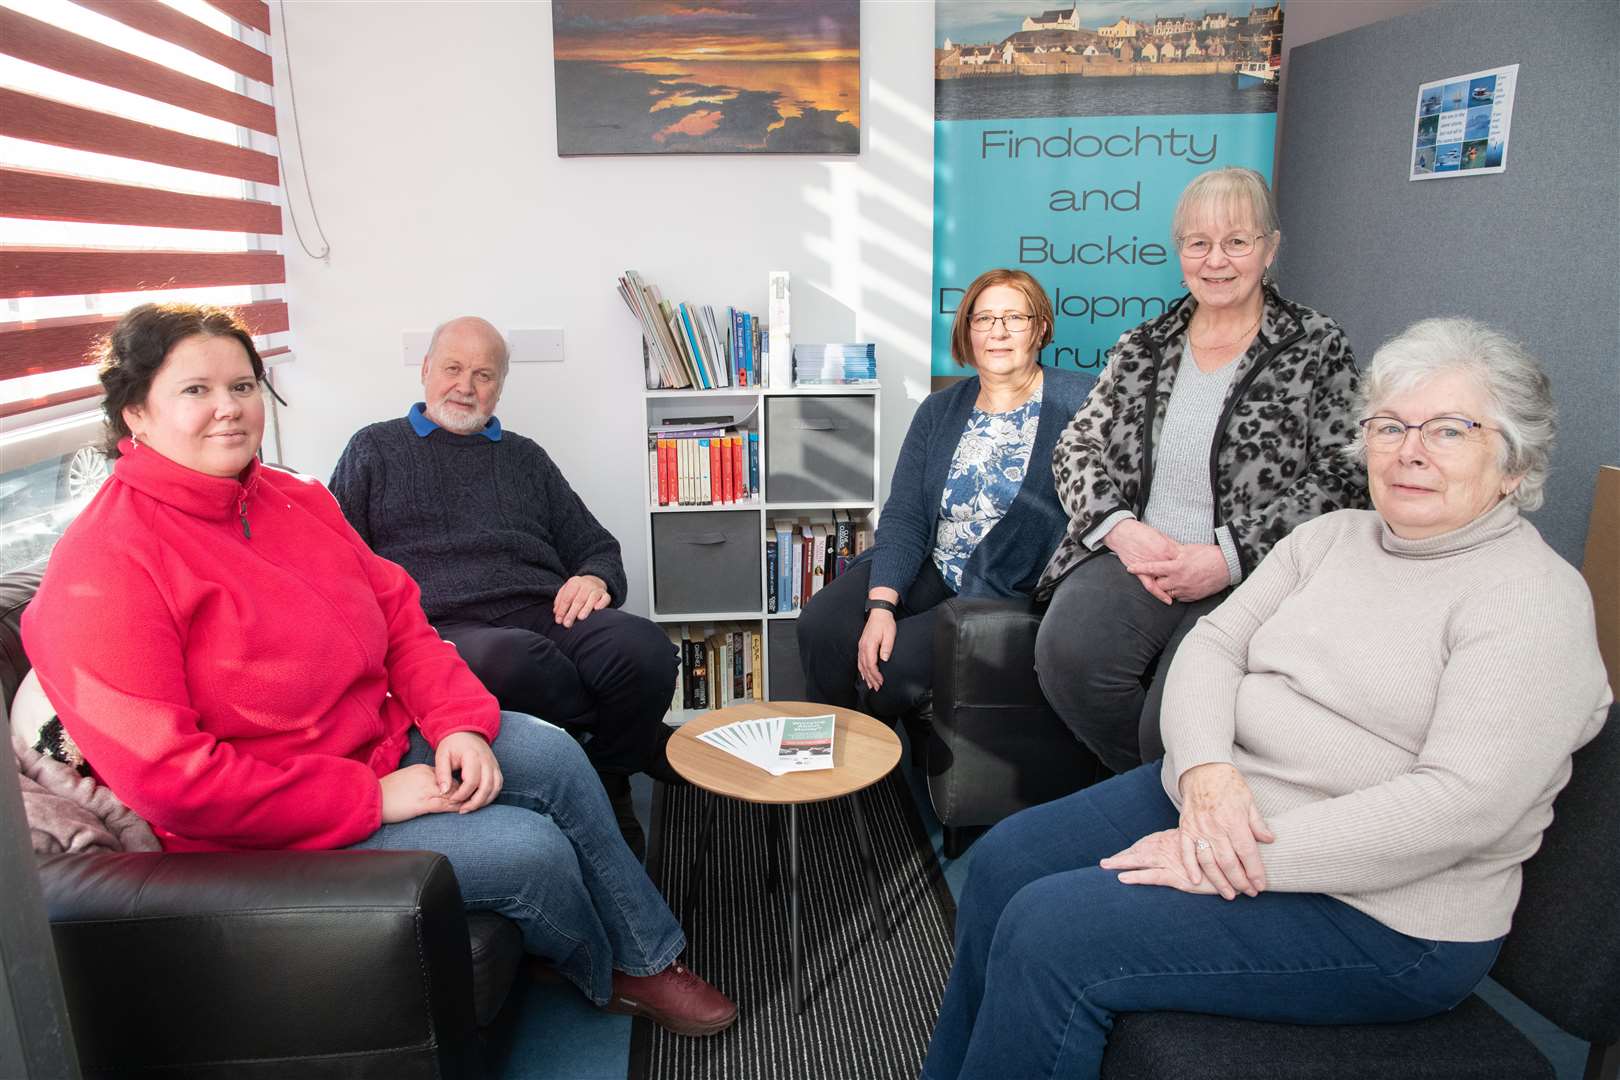 Findochty and Buckie Development Trust Steering Group chairwoman (second right) is joined by (from left) Anna Tumanova (Hub volunteer), Gordon McDonald (steering group member), Sheila Sellar (NHS Grampian Healthpoint), and Linda McDonald (steering group member). Picture: Daniel Forsyth